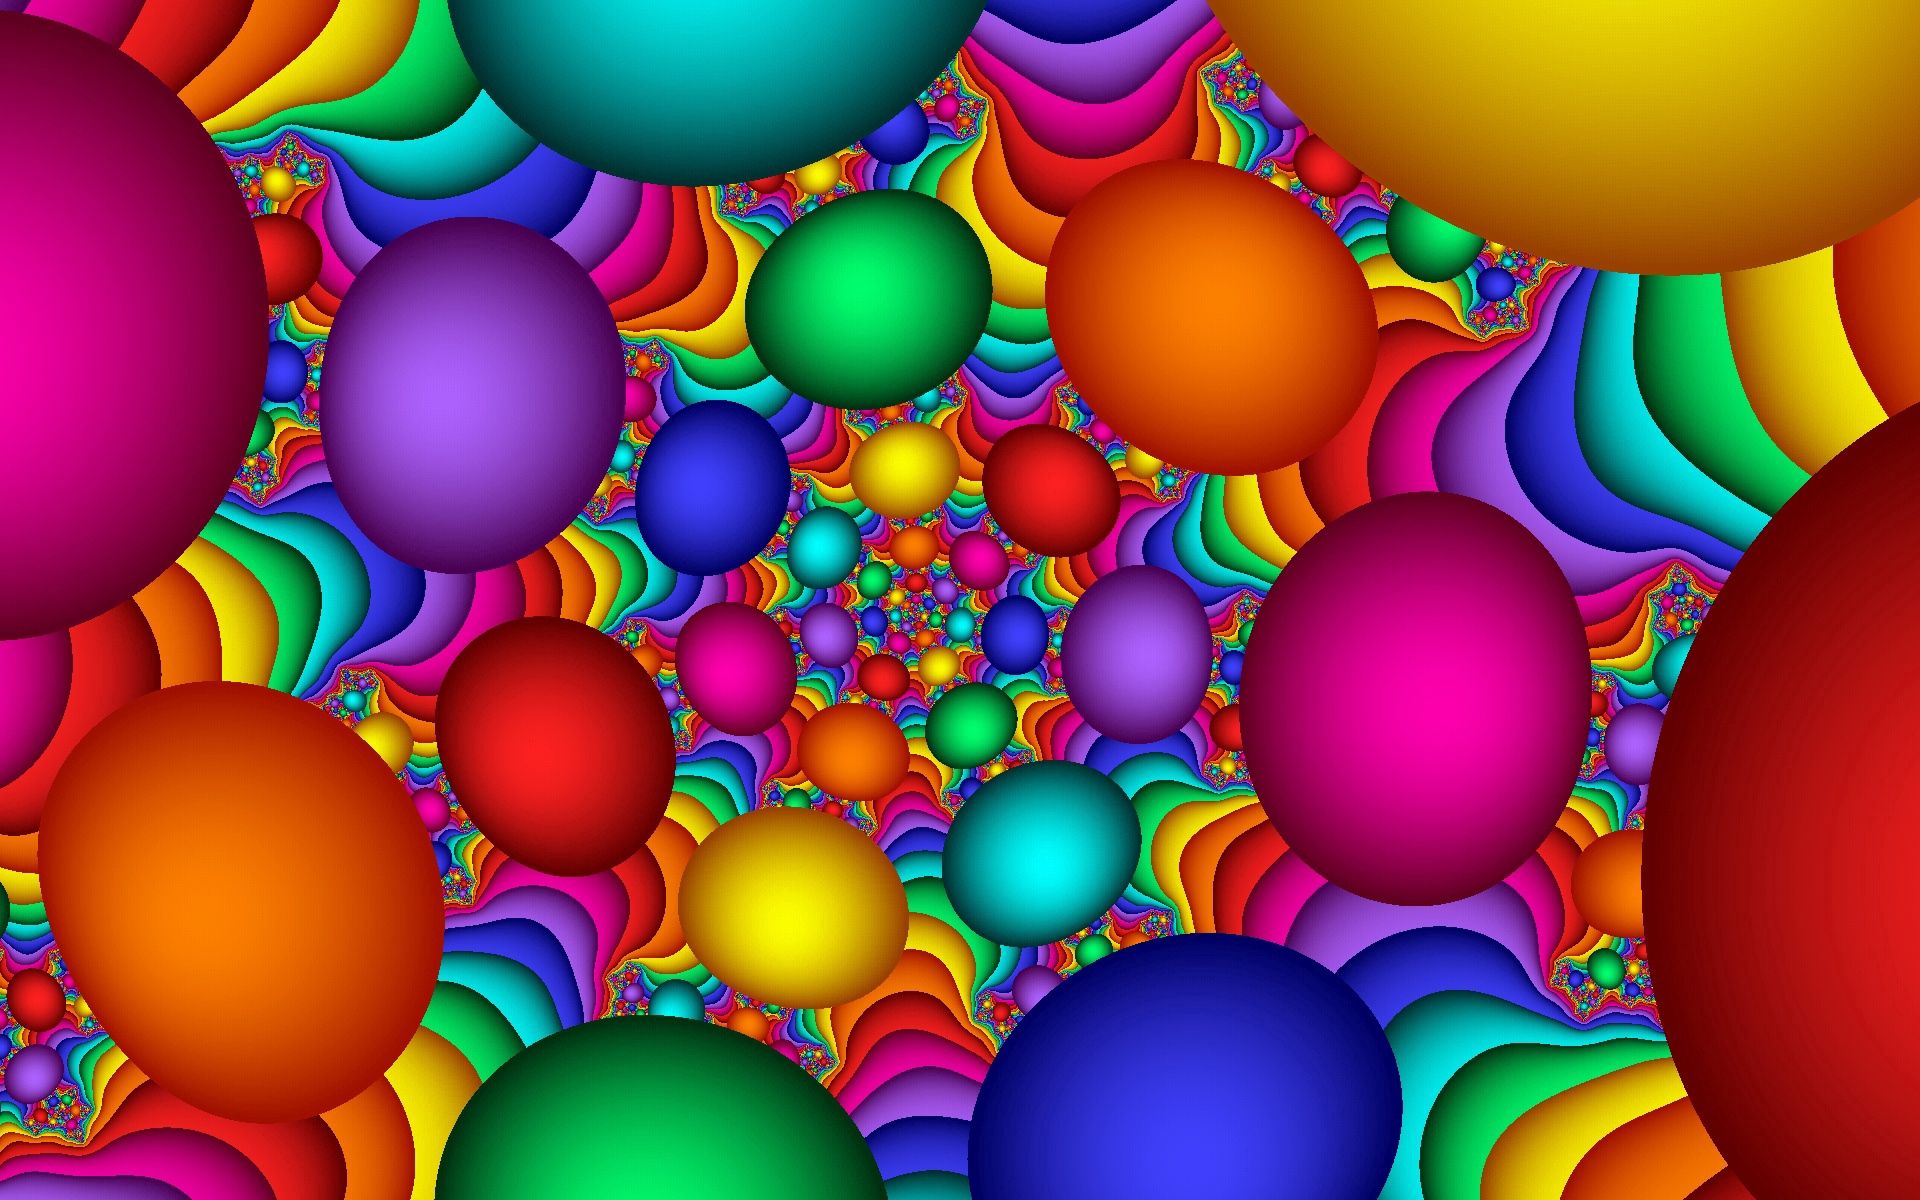 Wallpaper Full HD motley, multicolored, balls, abstract, background, bright